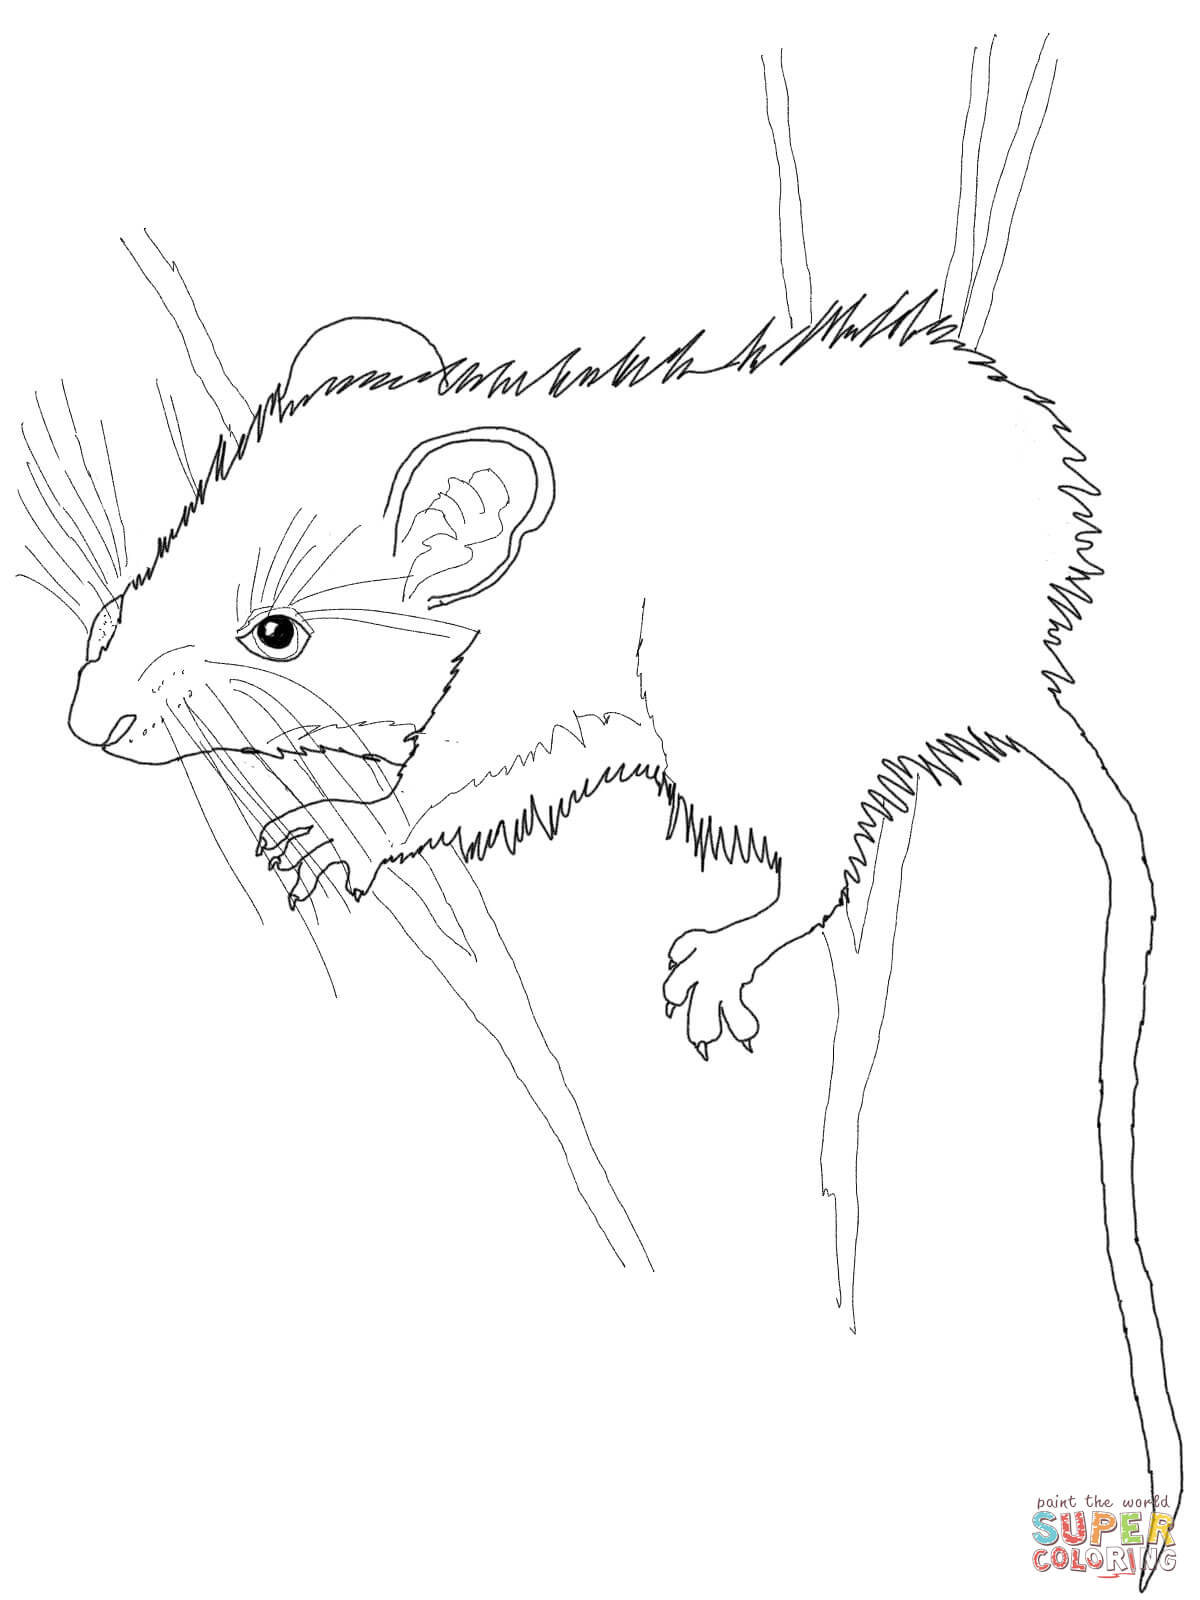 Harvest Mouse coloring #13, Download drawings